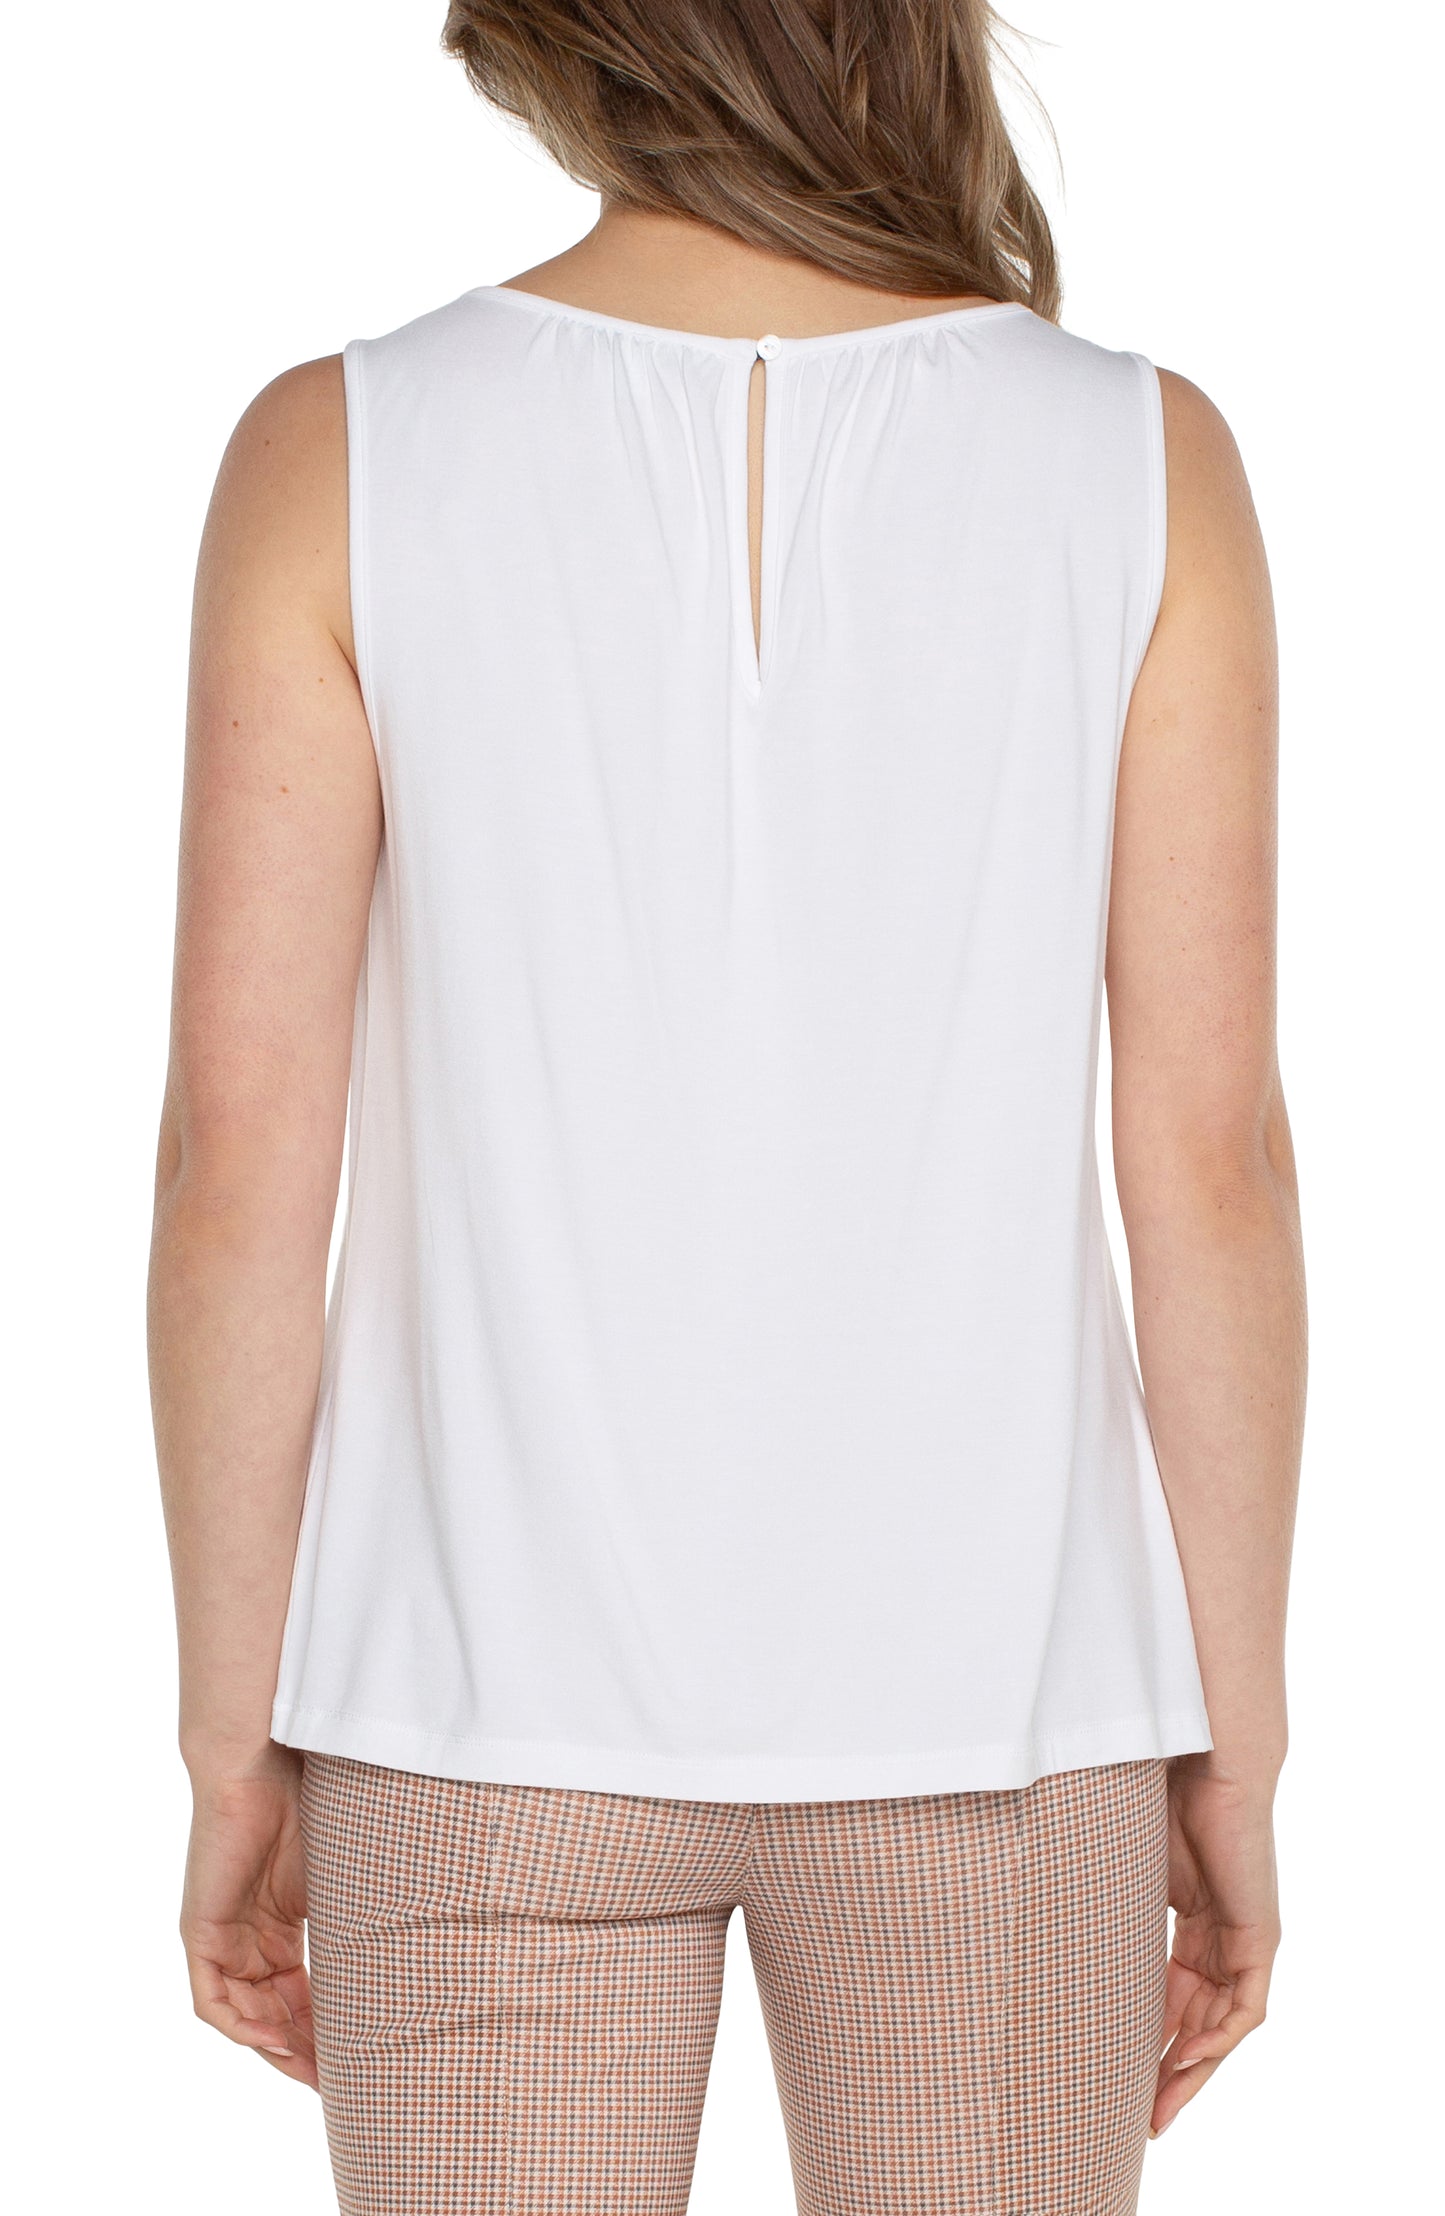 Liverpool A-Line Sleeveless Knit Top with Keyhole (White)